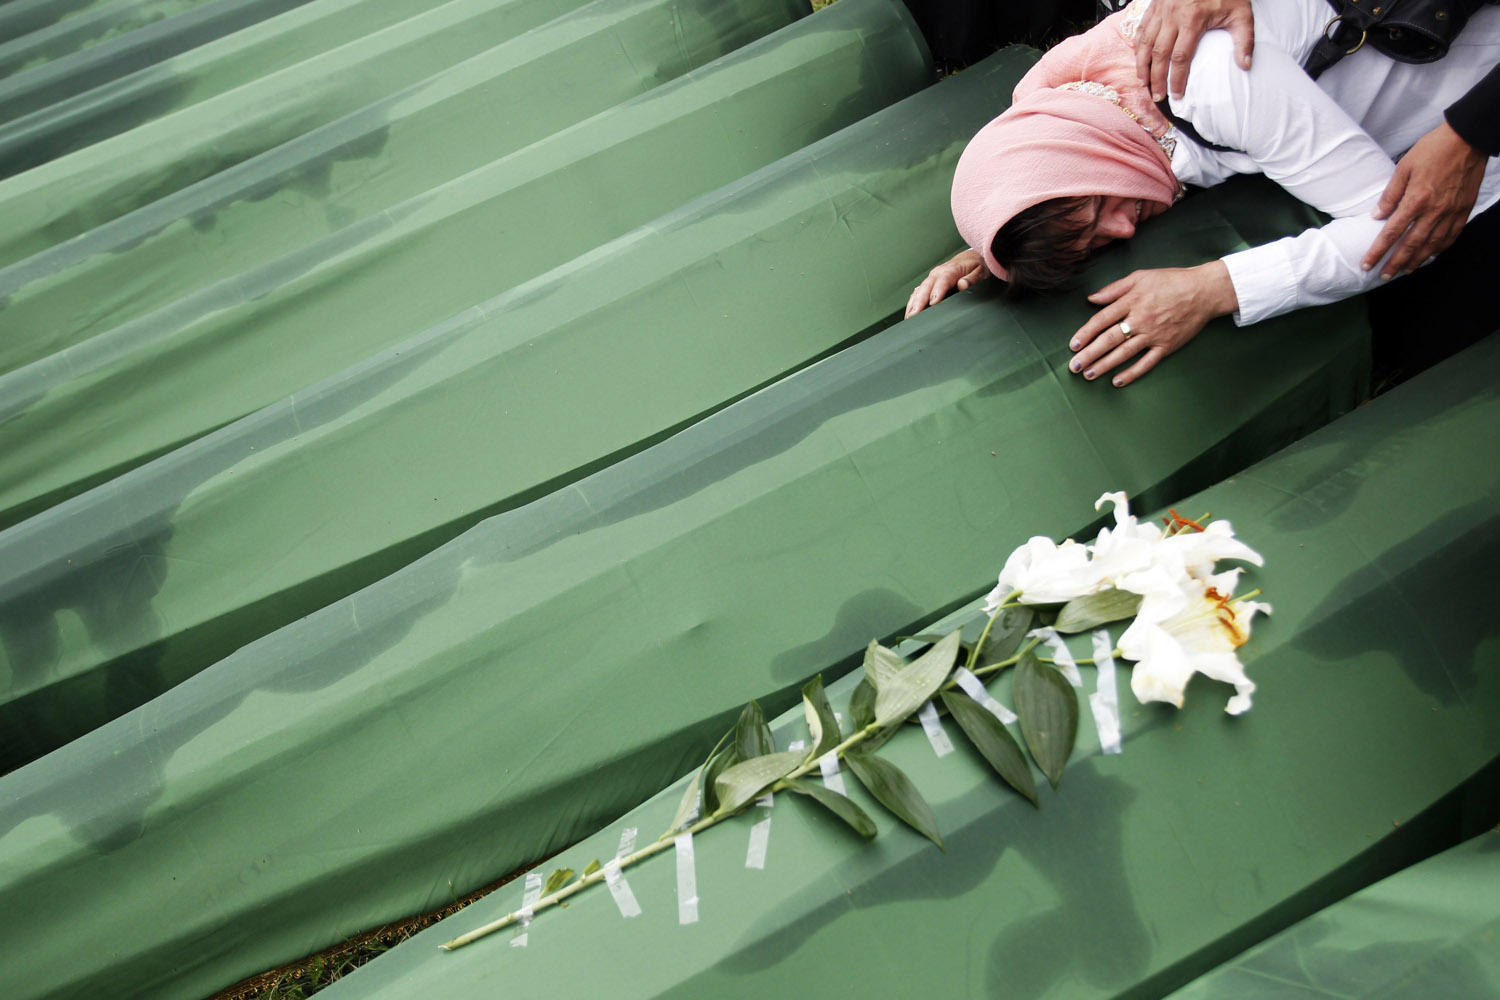 A Bosnian woman cries on the coffin of a relative, which is one of the 409 coffins of newly identified victims from the 1995 Srebrenica massacre